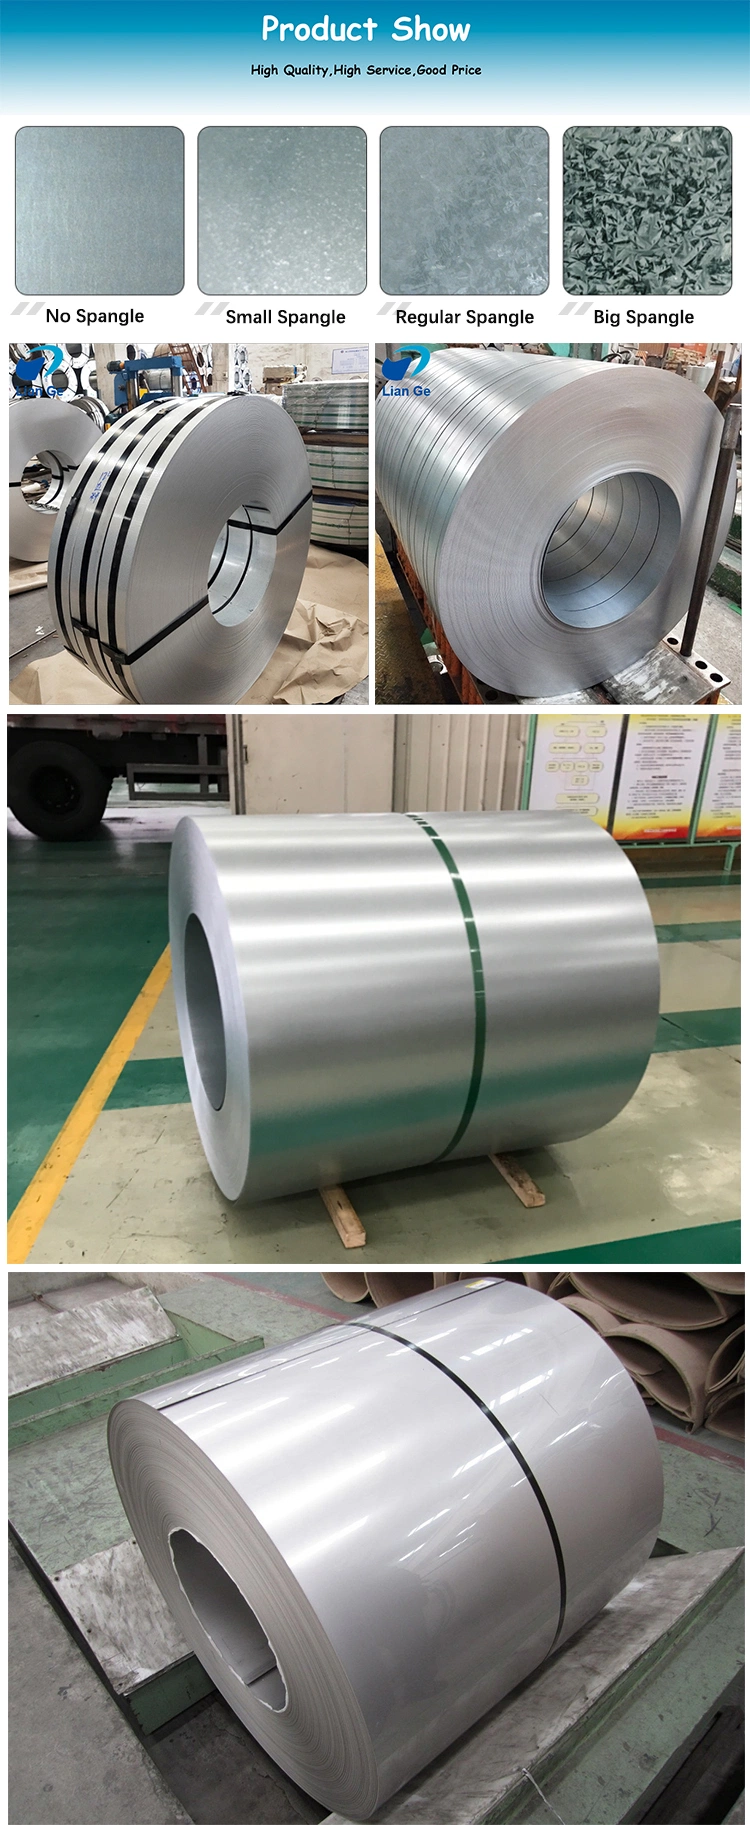 Liange Factory Gi Gl SGCC Secc Sghc DC01 DC02 DC03 SPCC Cold Rolled Cr Galvalume Galvanized Steel Coil Price Steel in Stock